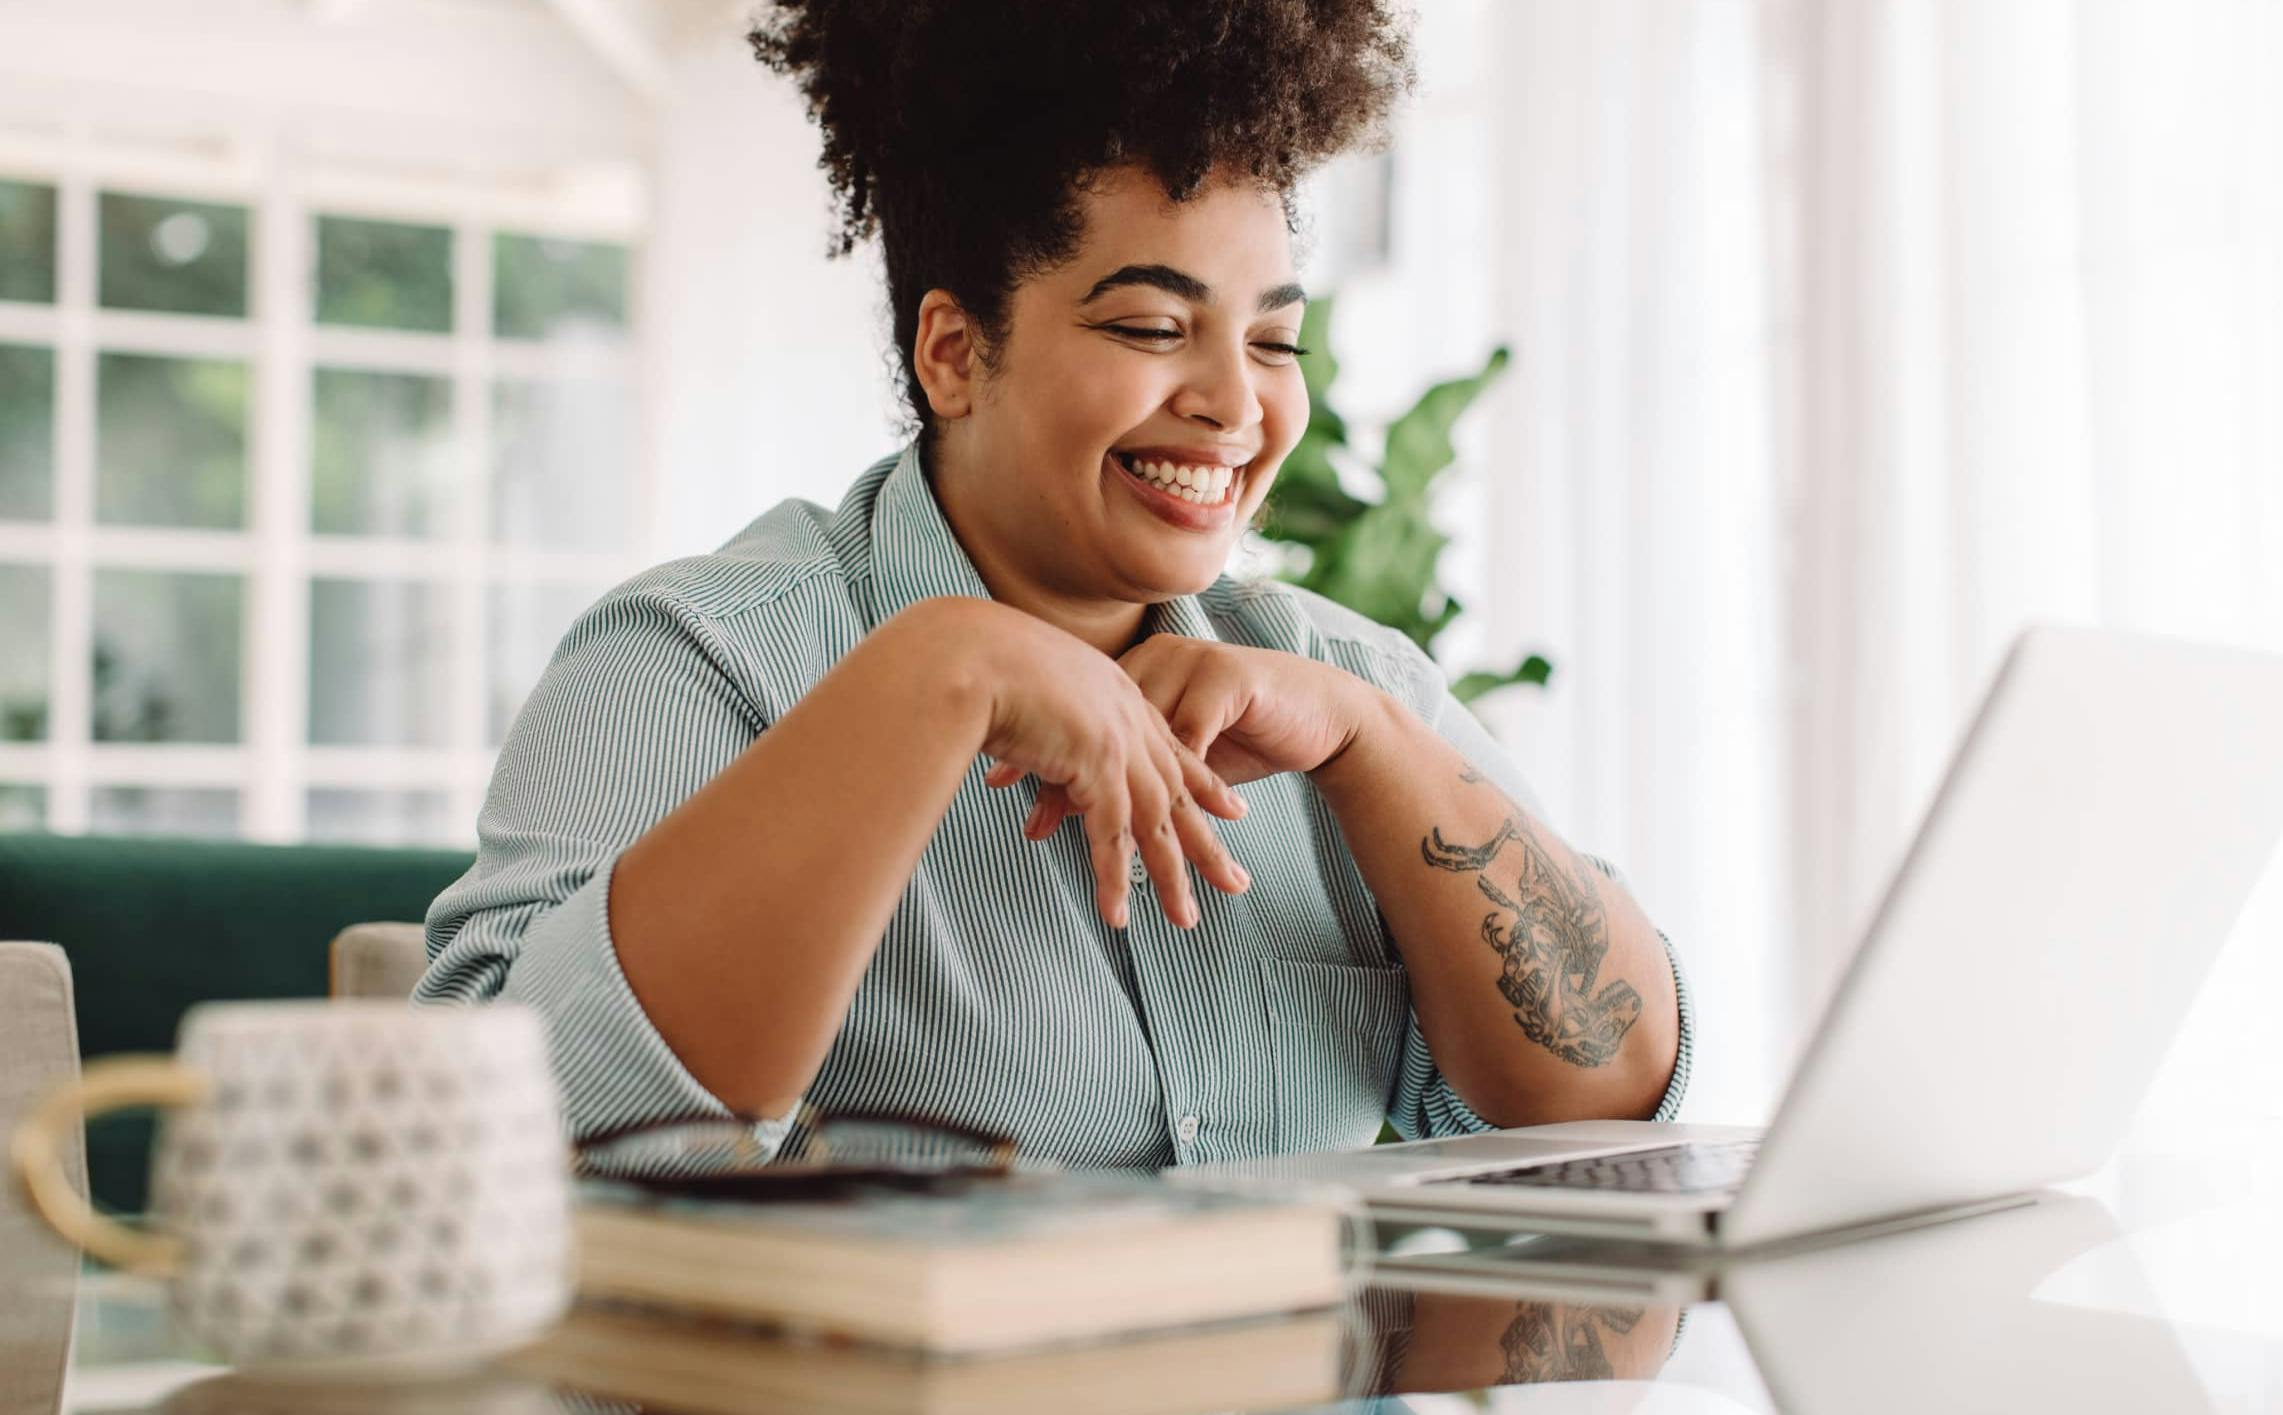 Image of a smiling woman with a tattoo on her forearm gazing down at a laptop in her home.